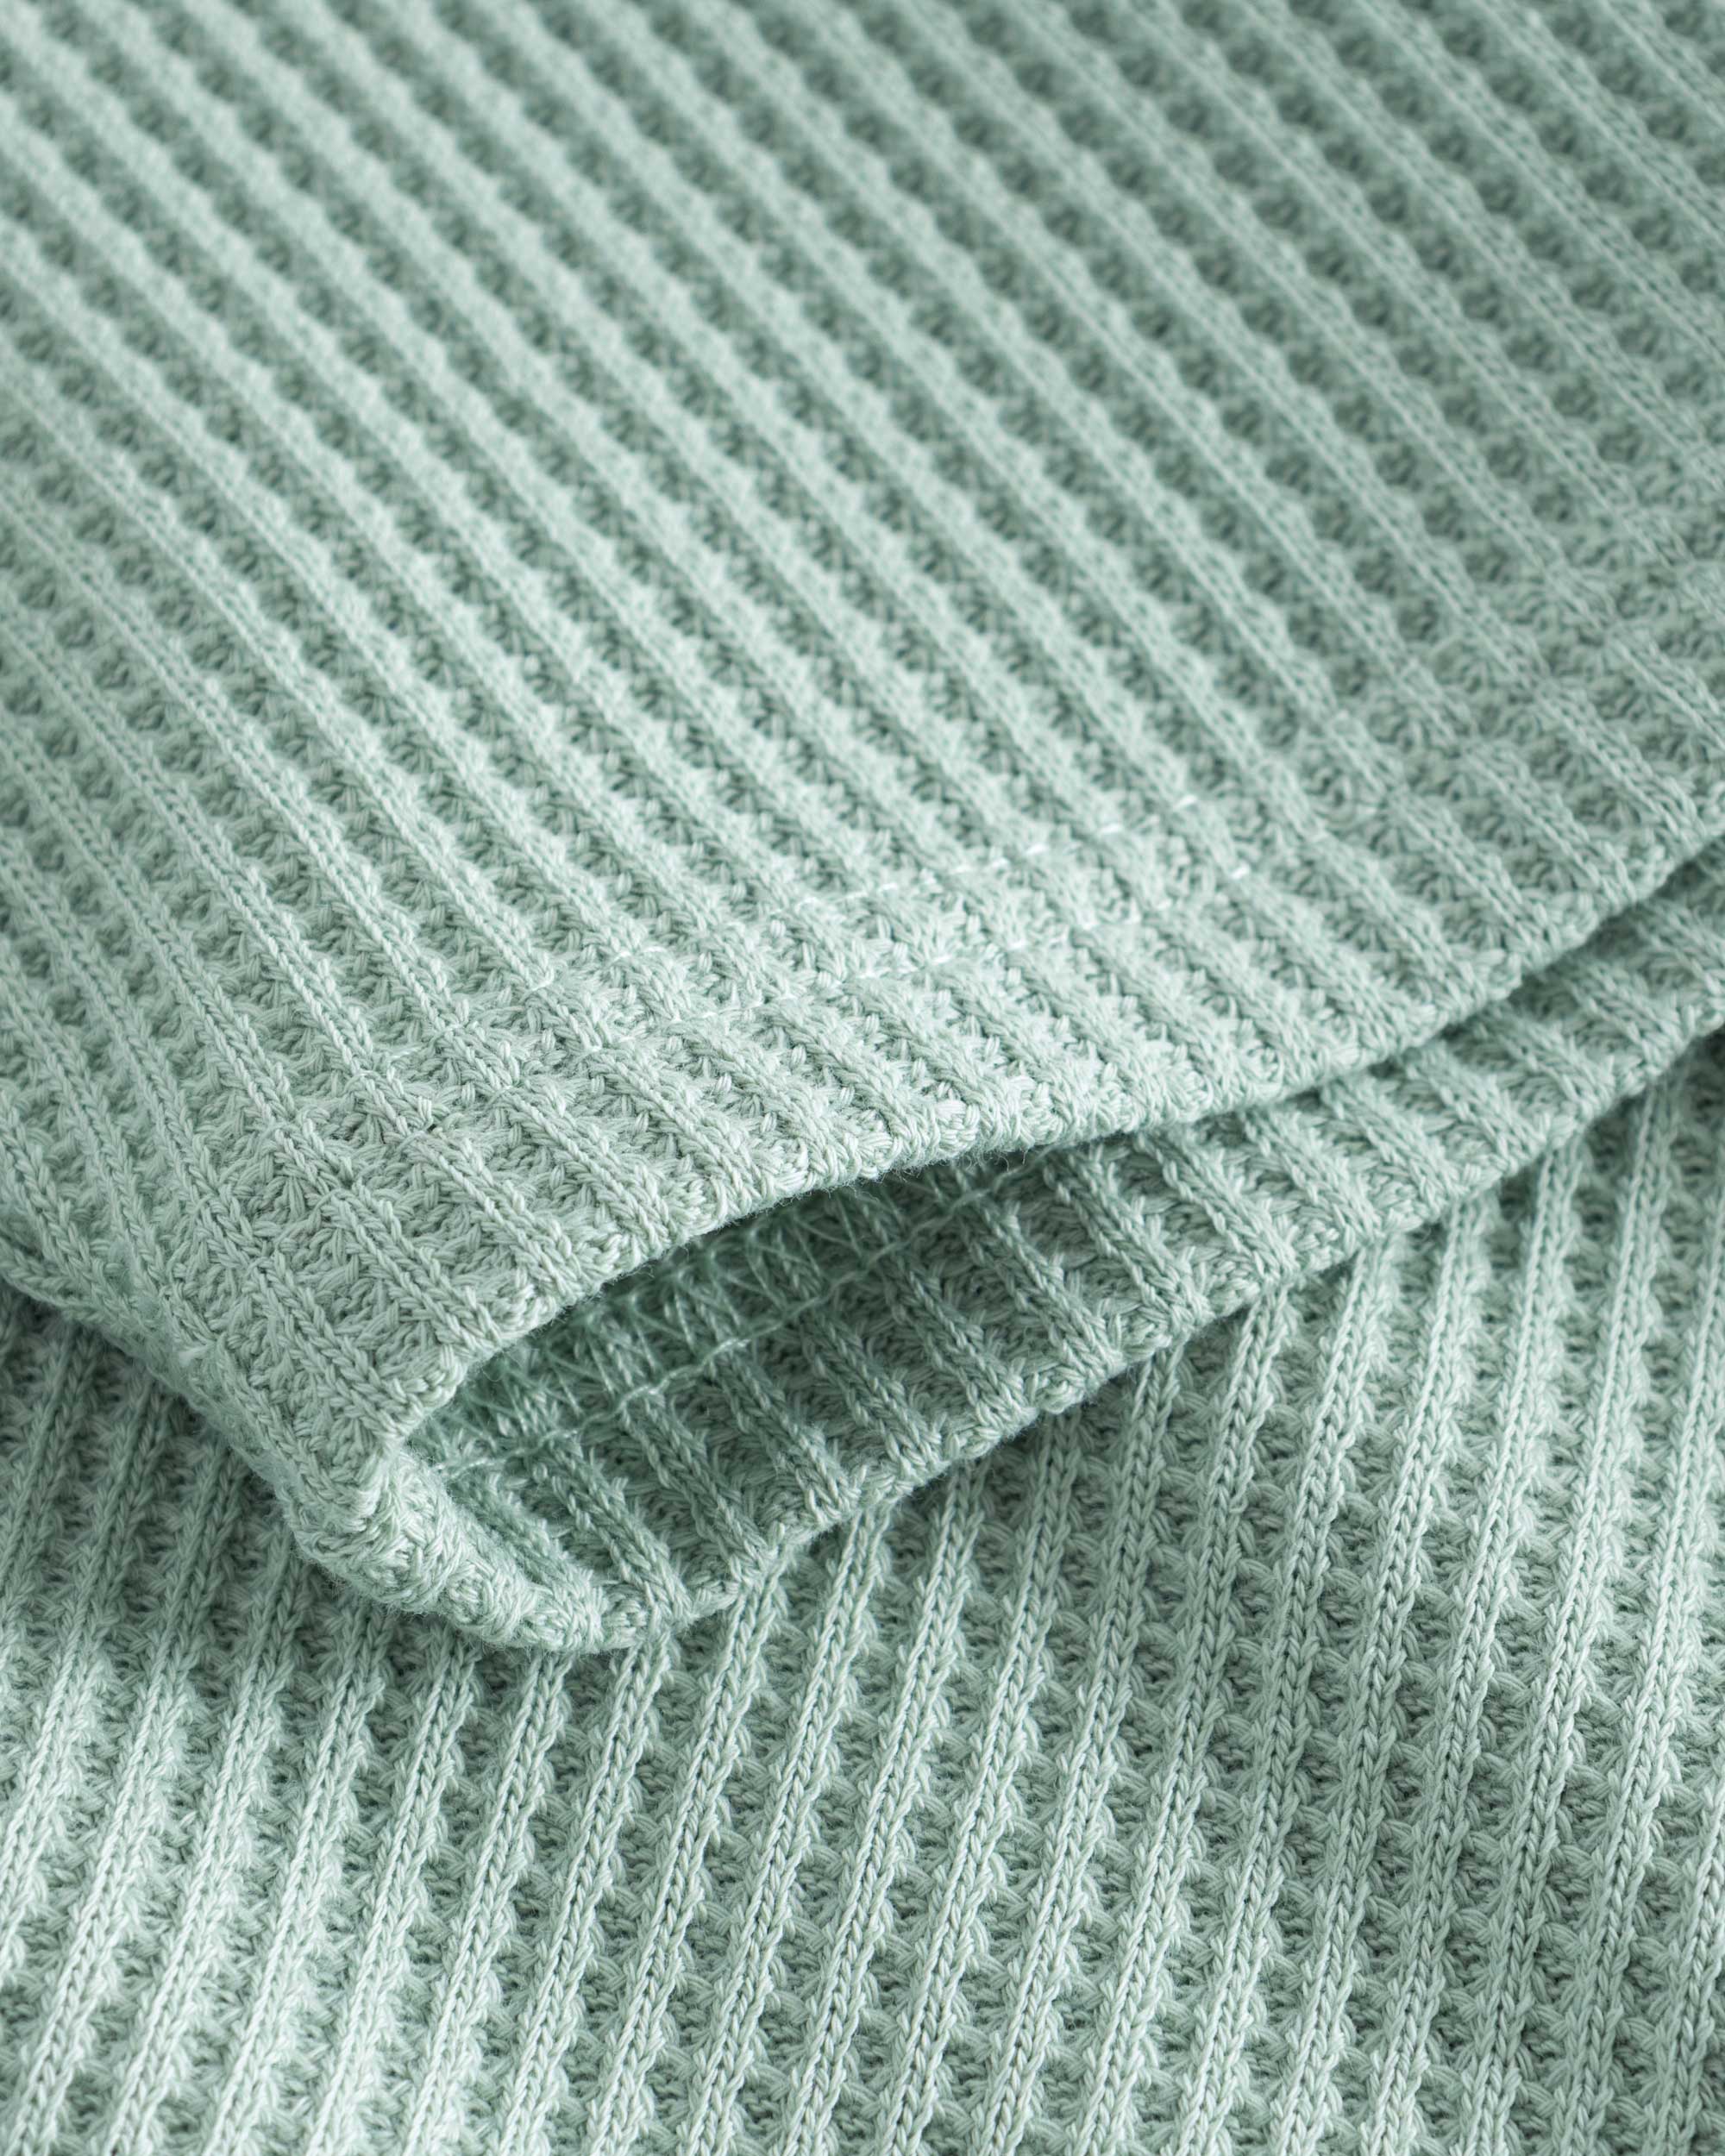 Close up on stitchings and sleeve on a mint green waffle-patterned sweatshirt